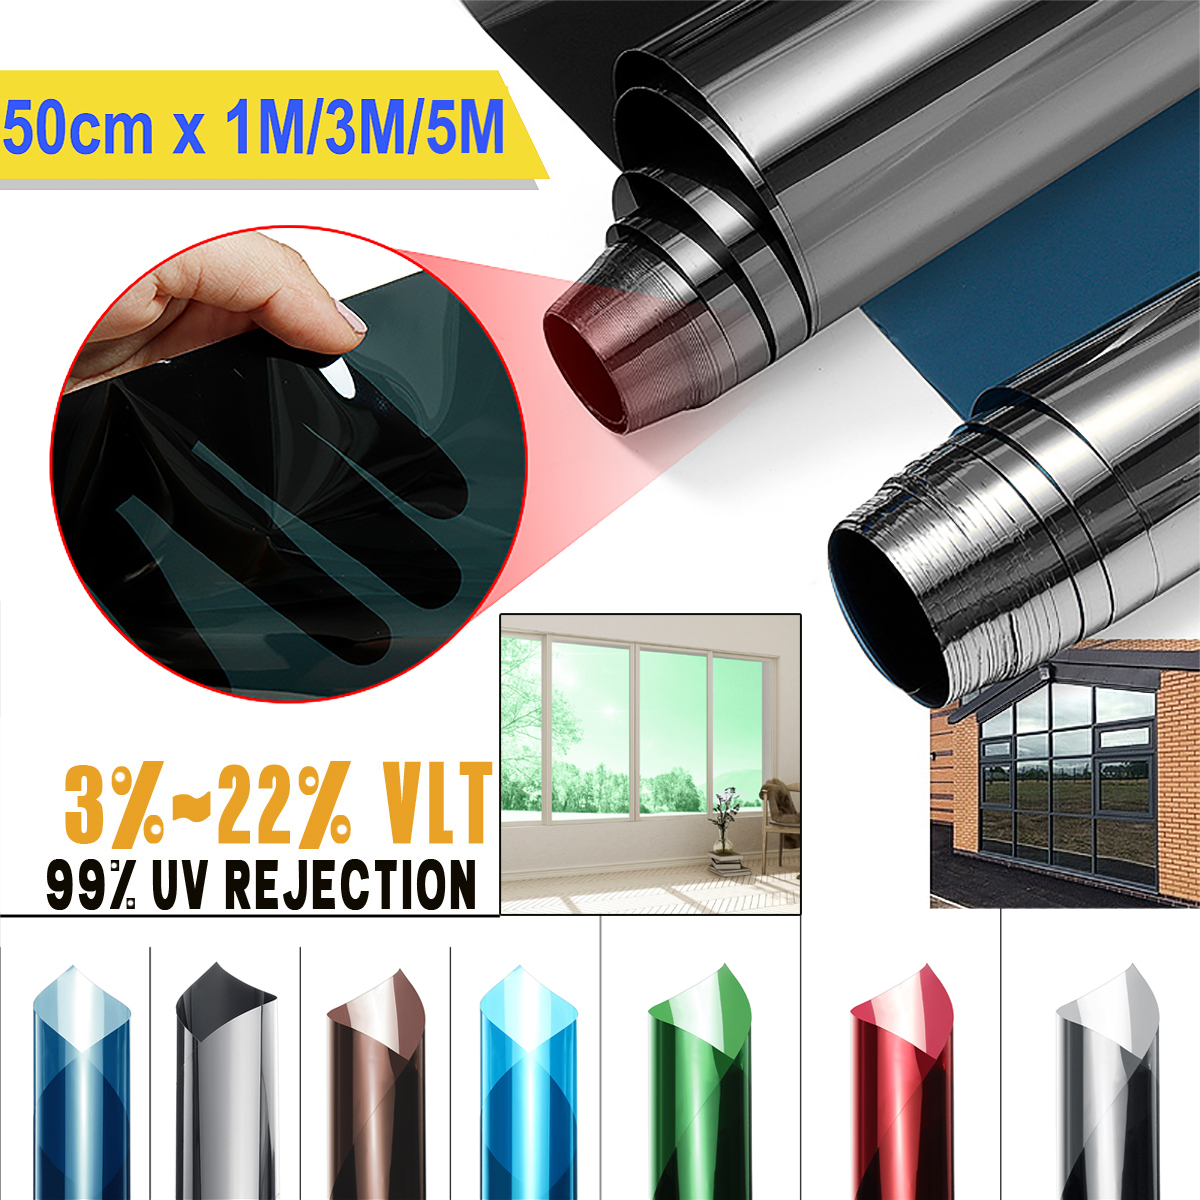 Waterproof-Window-Film-One-Way-Mirror-Silver-Insulation-Stickers-UV-Rejection-Privacy-Tint-Films-Hom-1809488-1